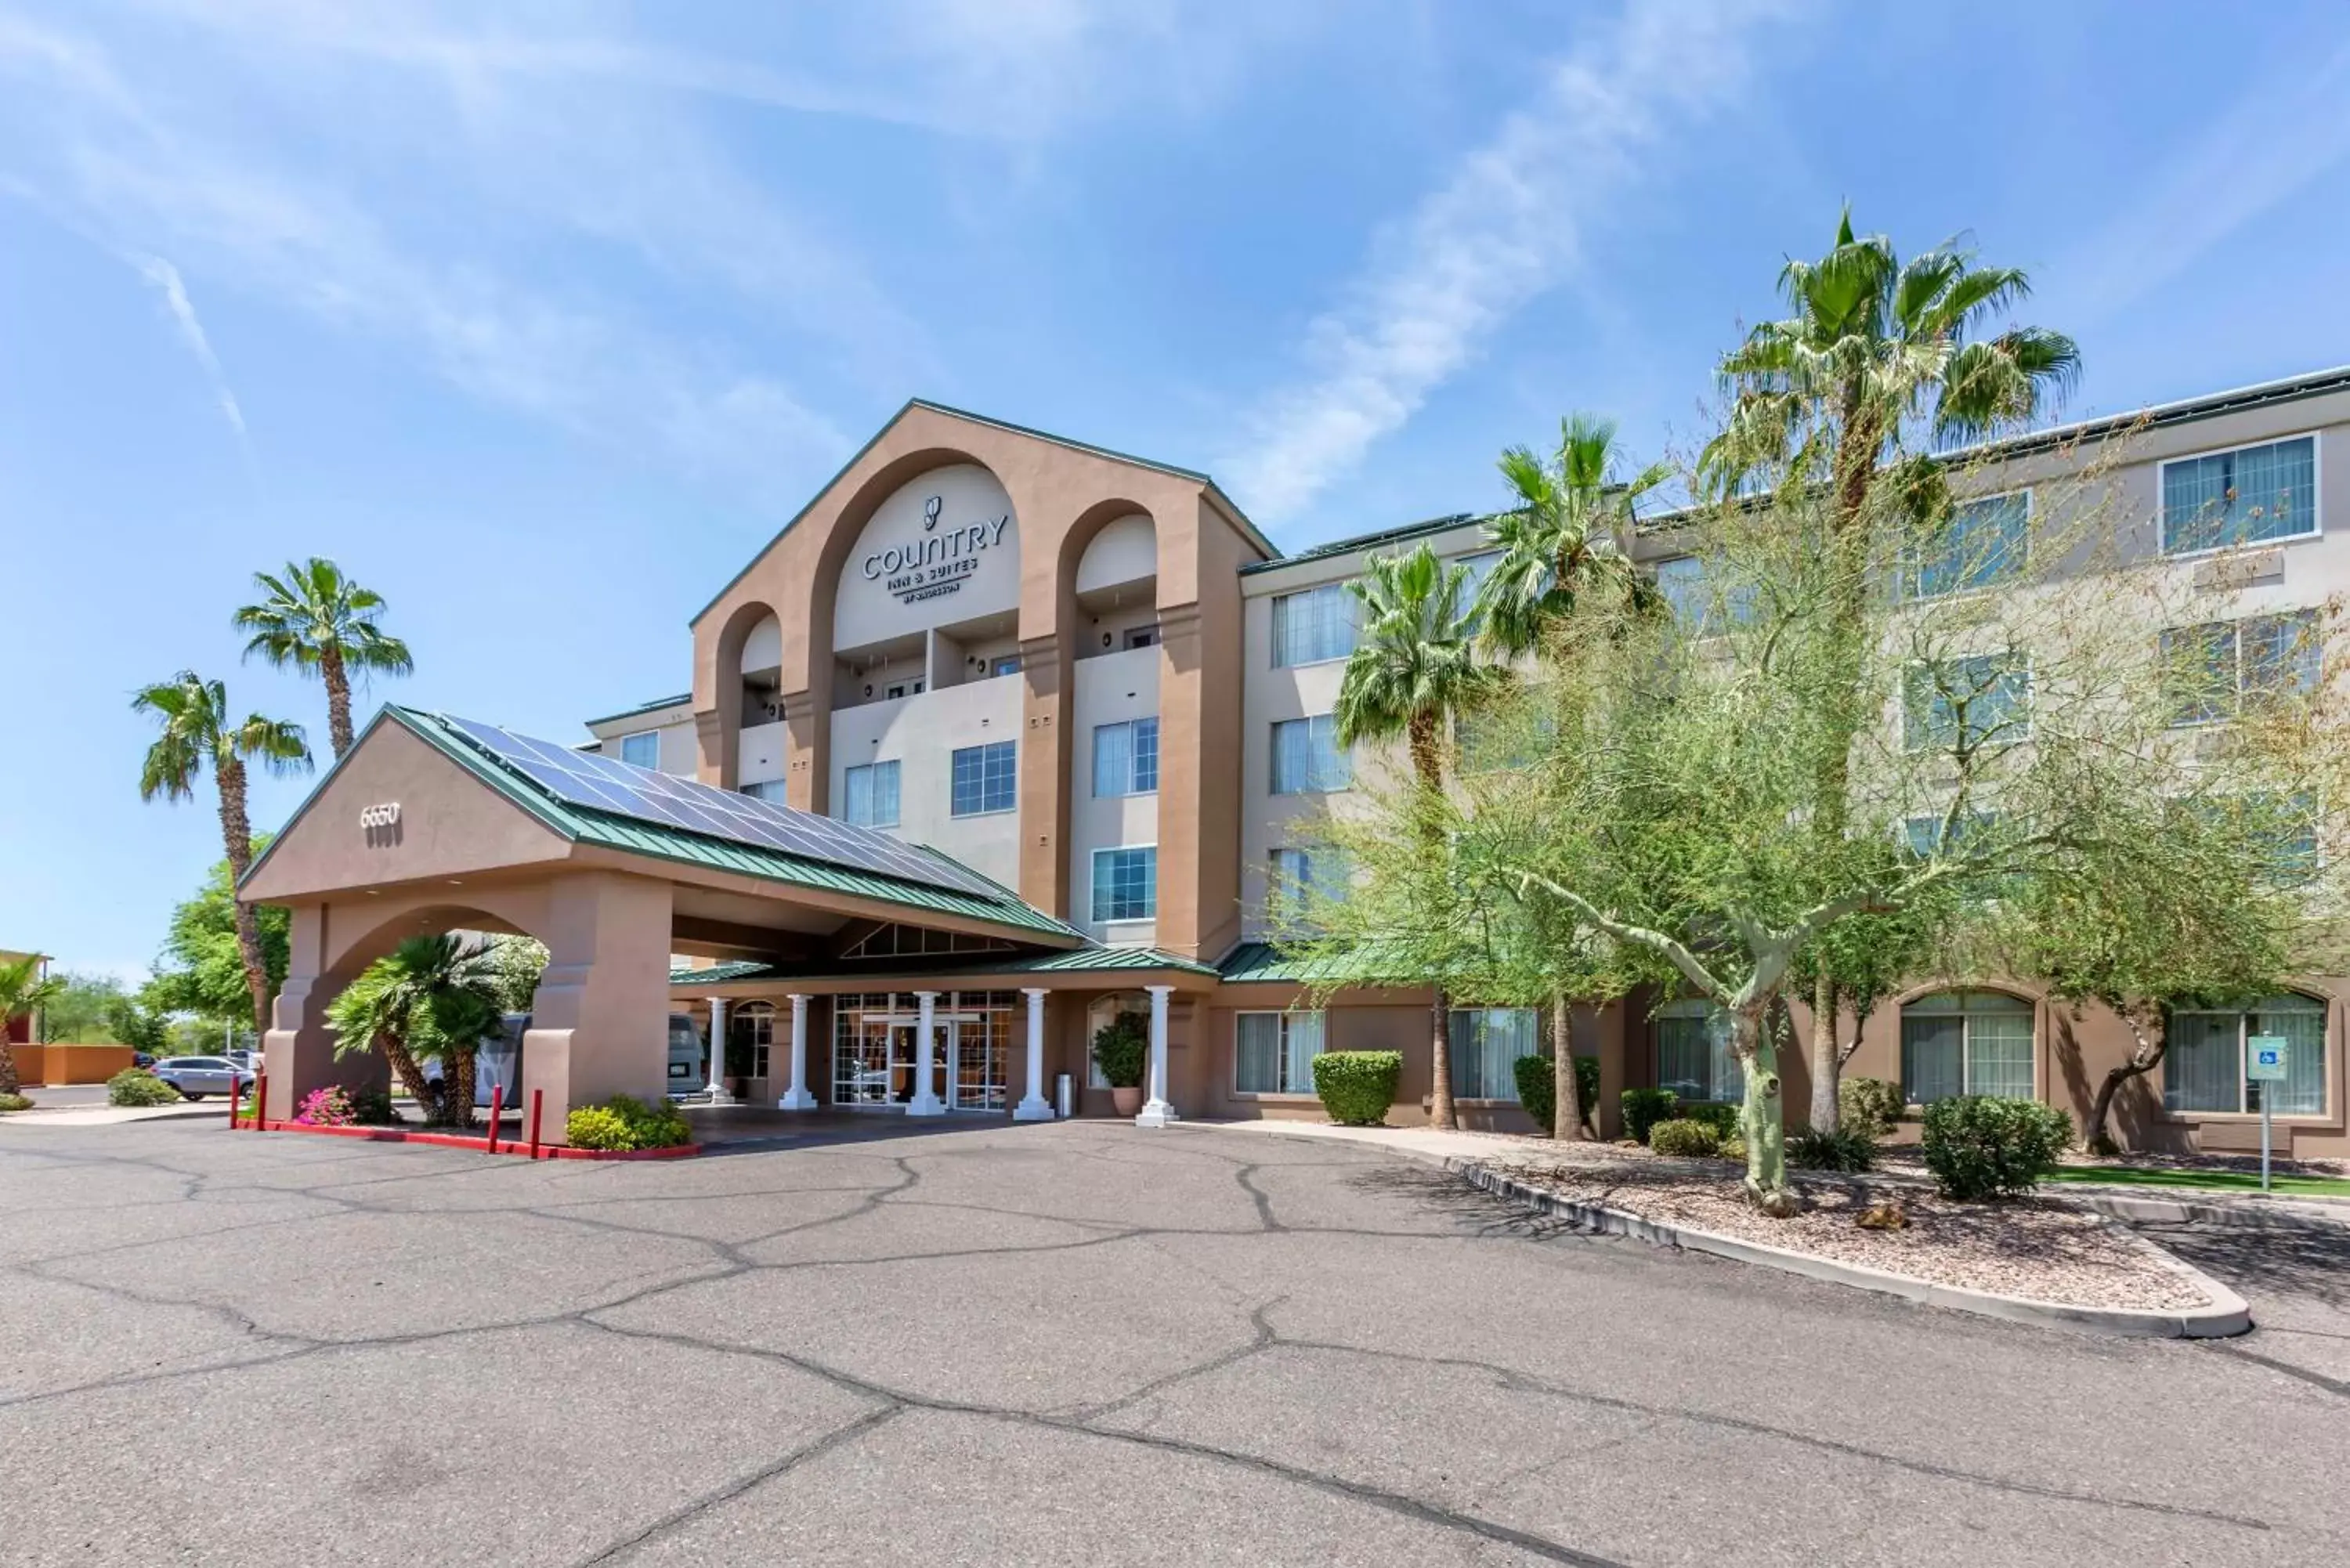 Property Building in Country Inn & Suites by Radisson, Mesa, AZ